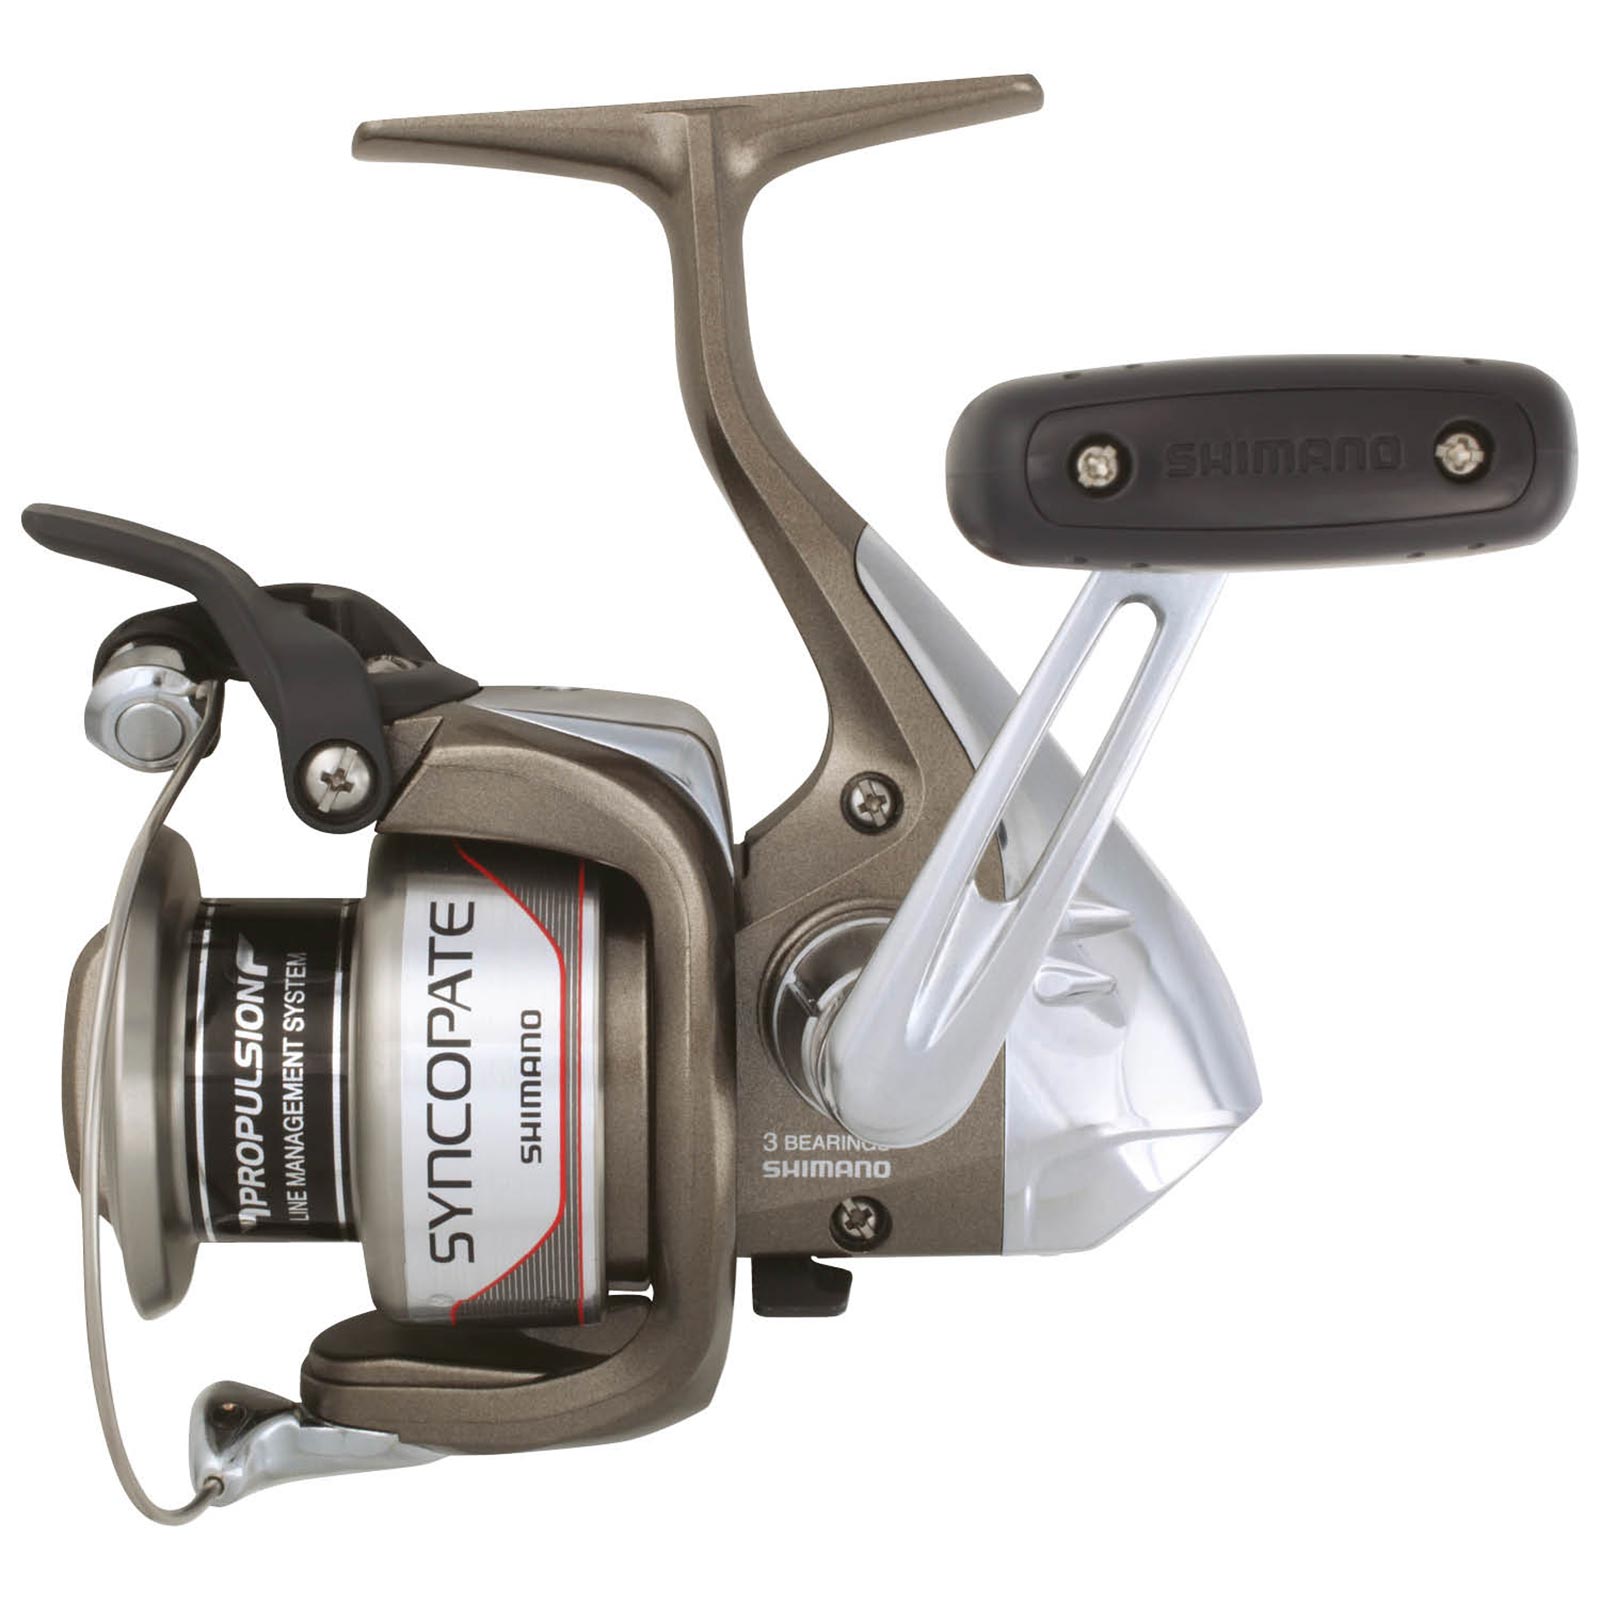 Discount Shimano Sienna FG 2500 Spinning Reel for Sale